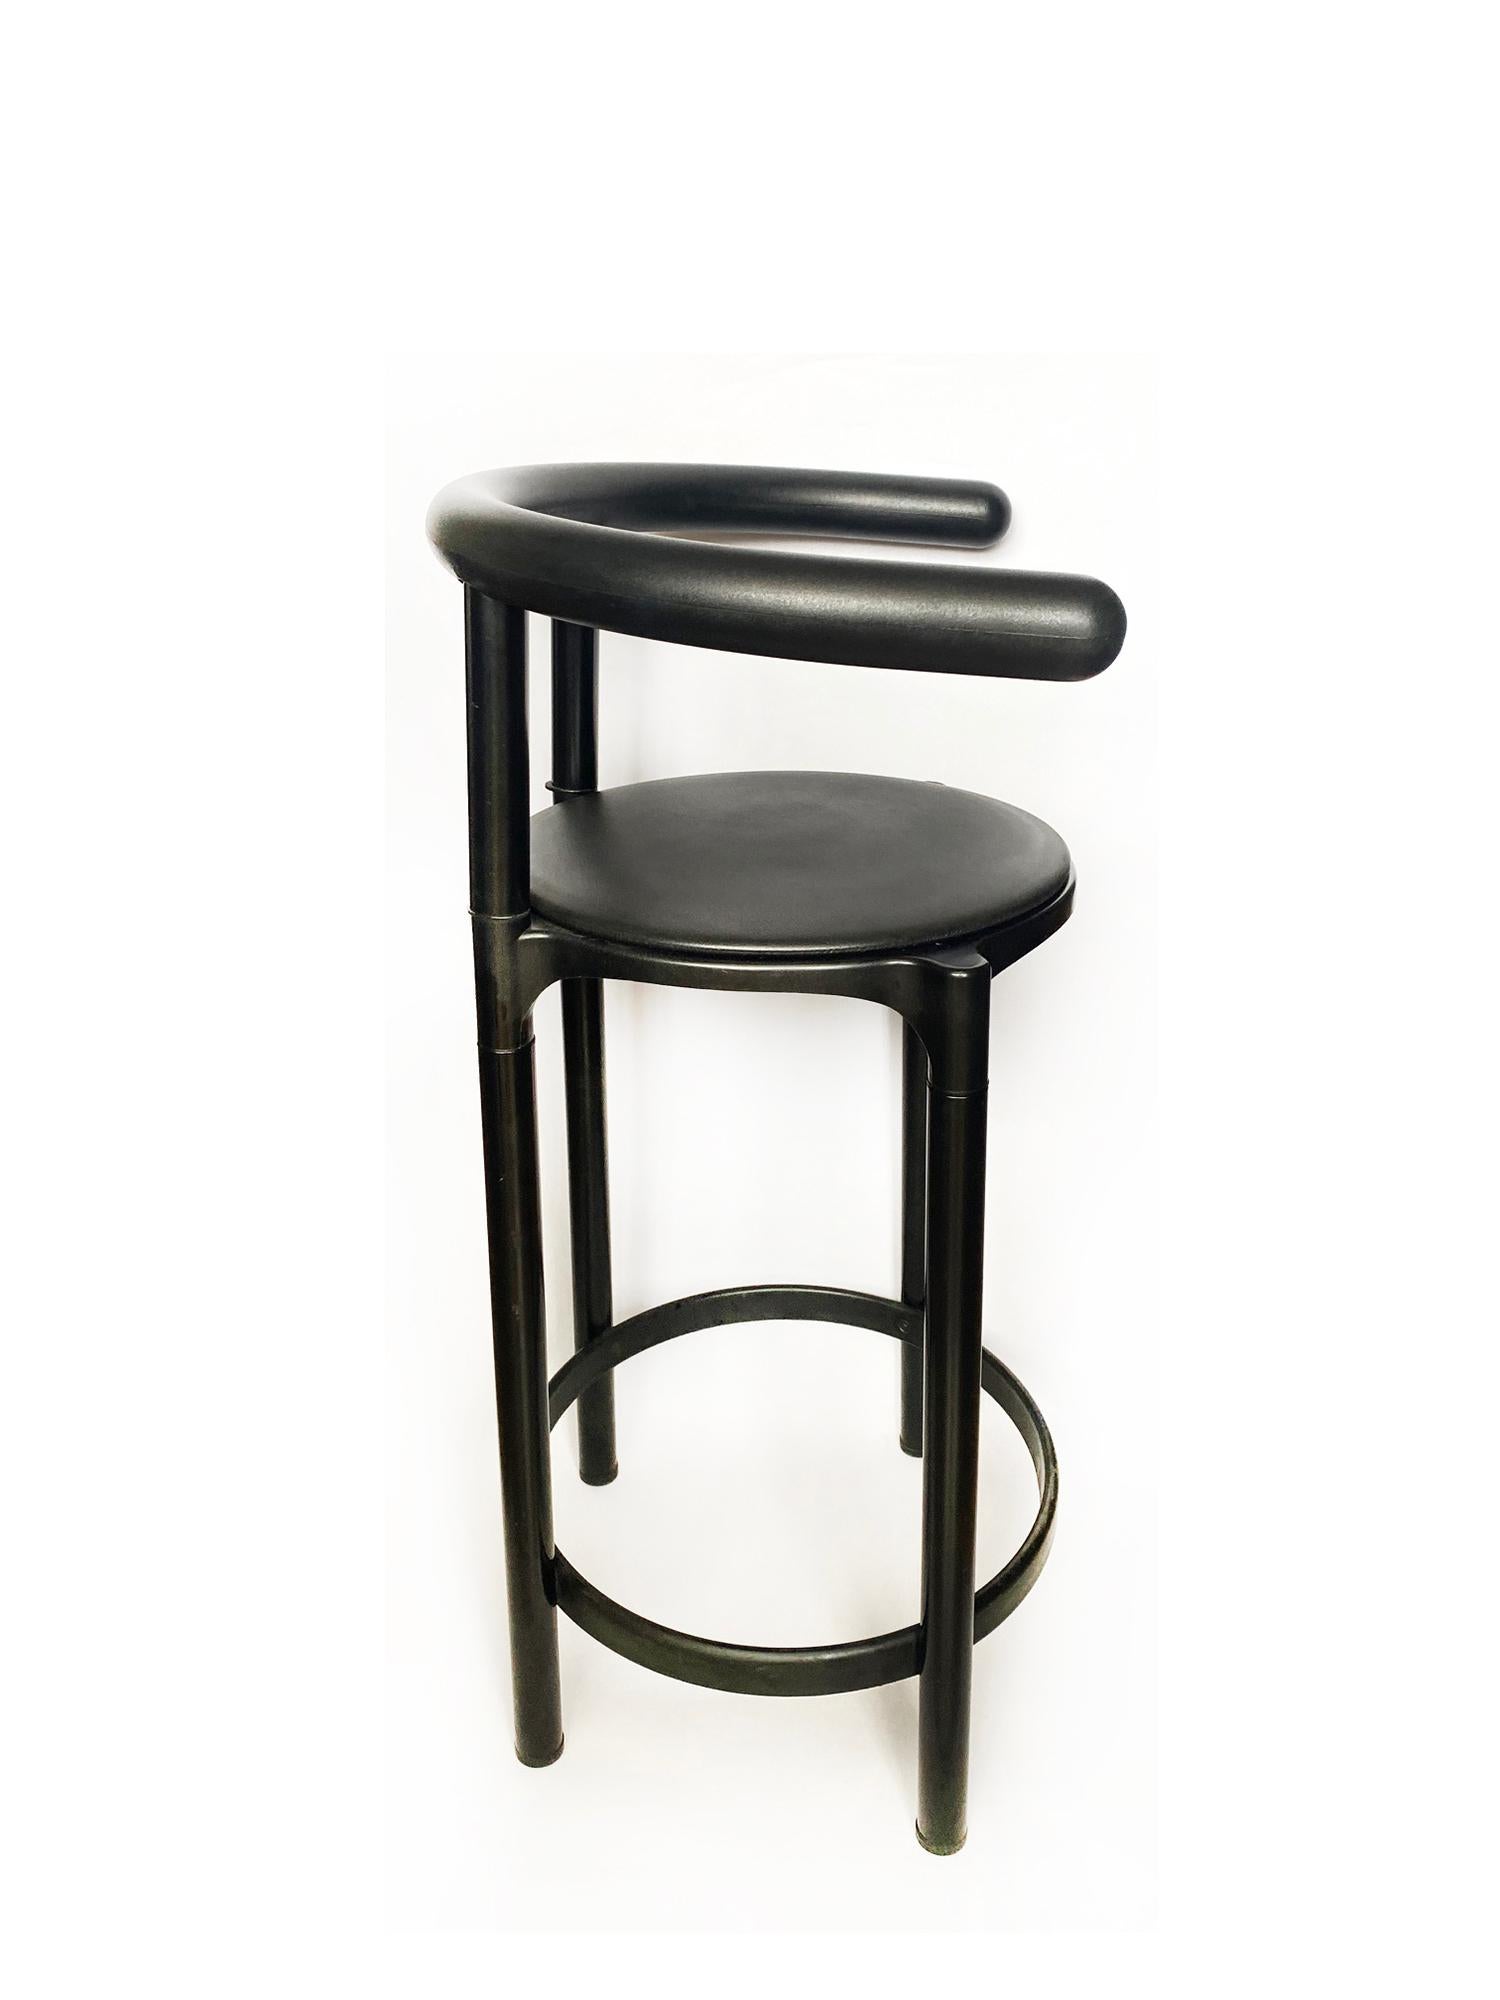 Pair of stools by Anna Castelli Ferrieri, Kartell, 1980.
Polymer, metal.
Very comfortable.